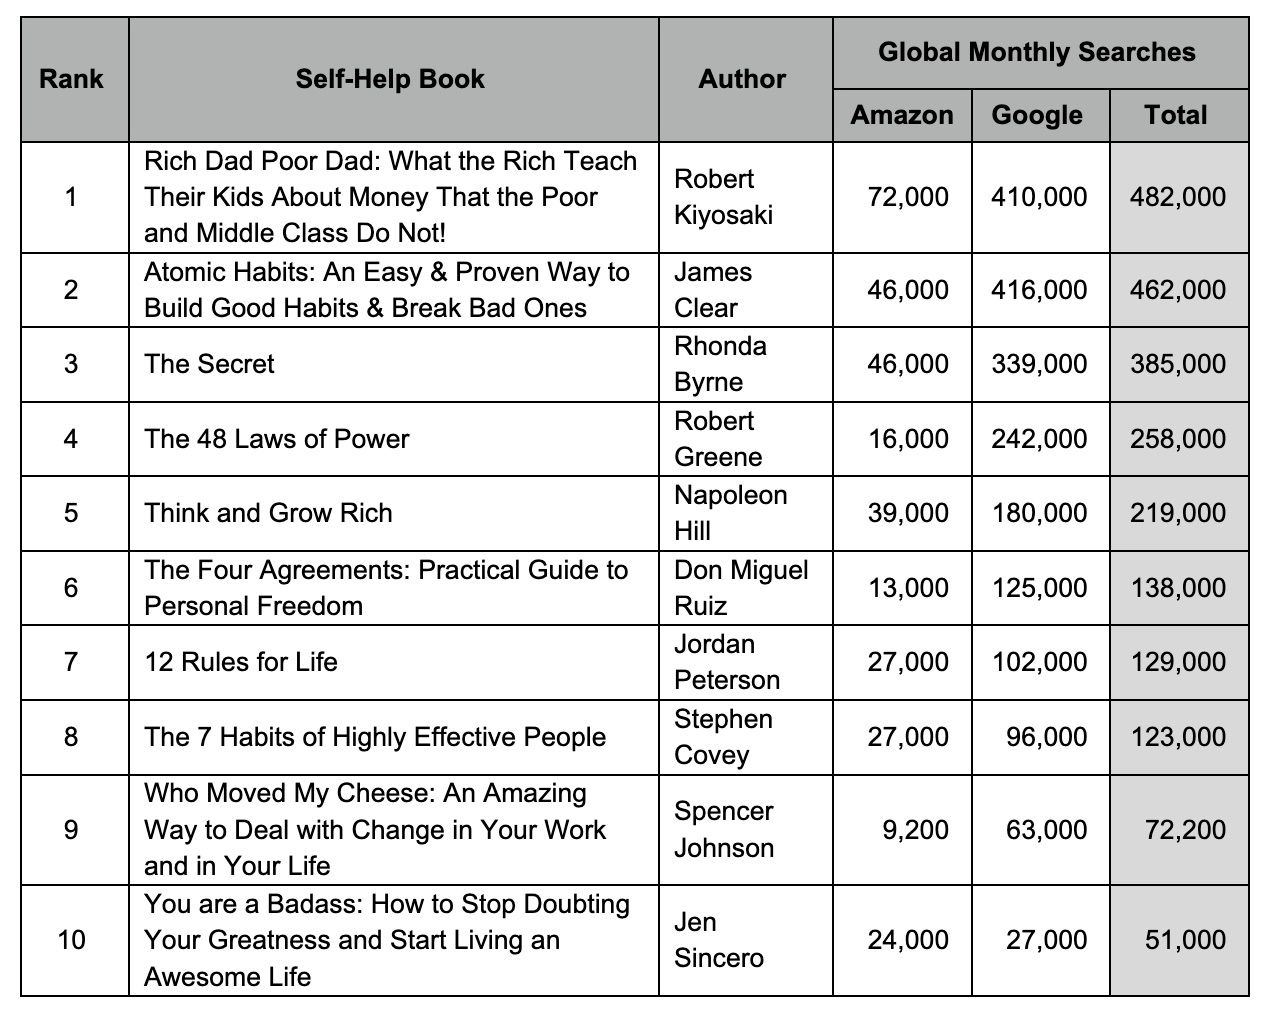 Chart of most popular self-help books from typing.com, with Rich Dad Poor Dad and Atomic Habits at the top.